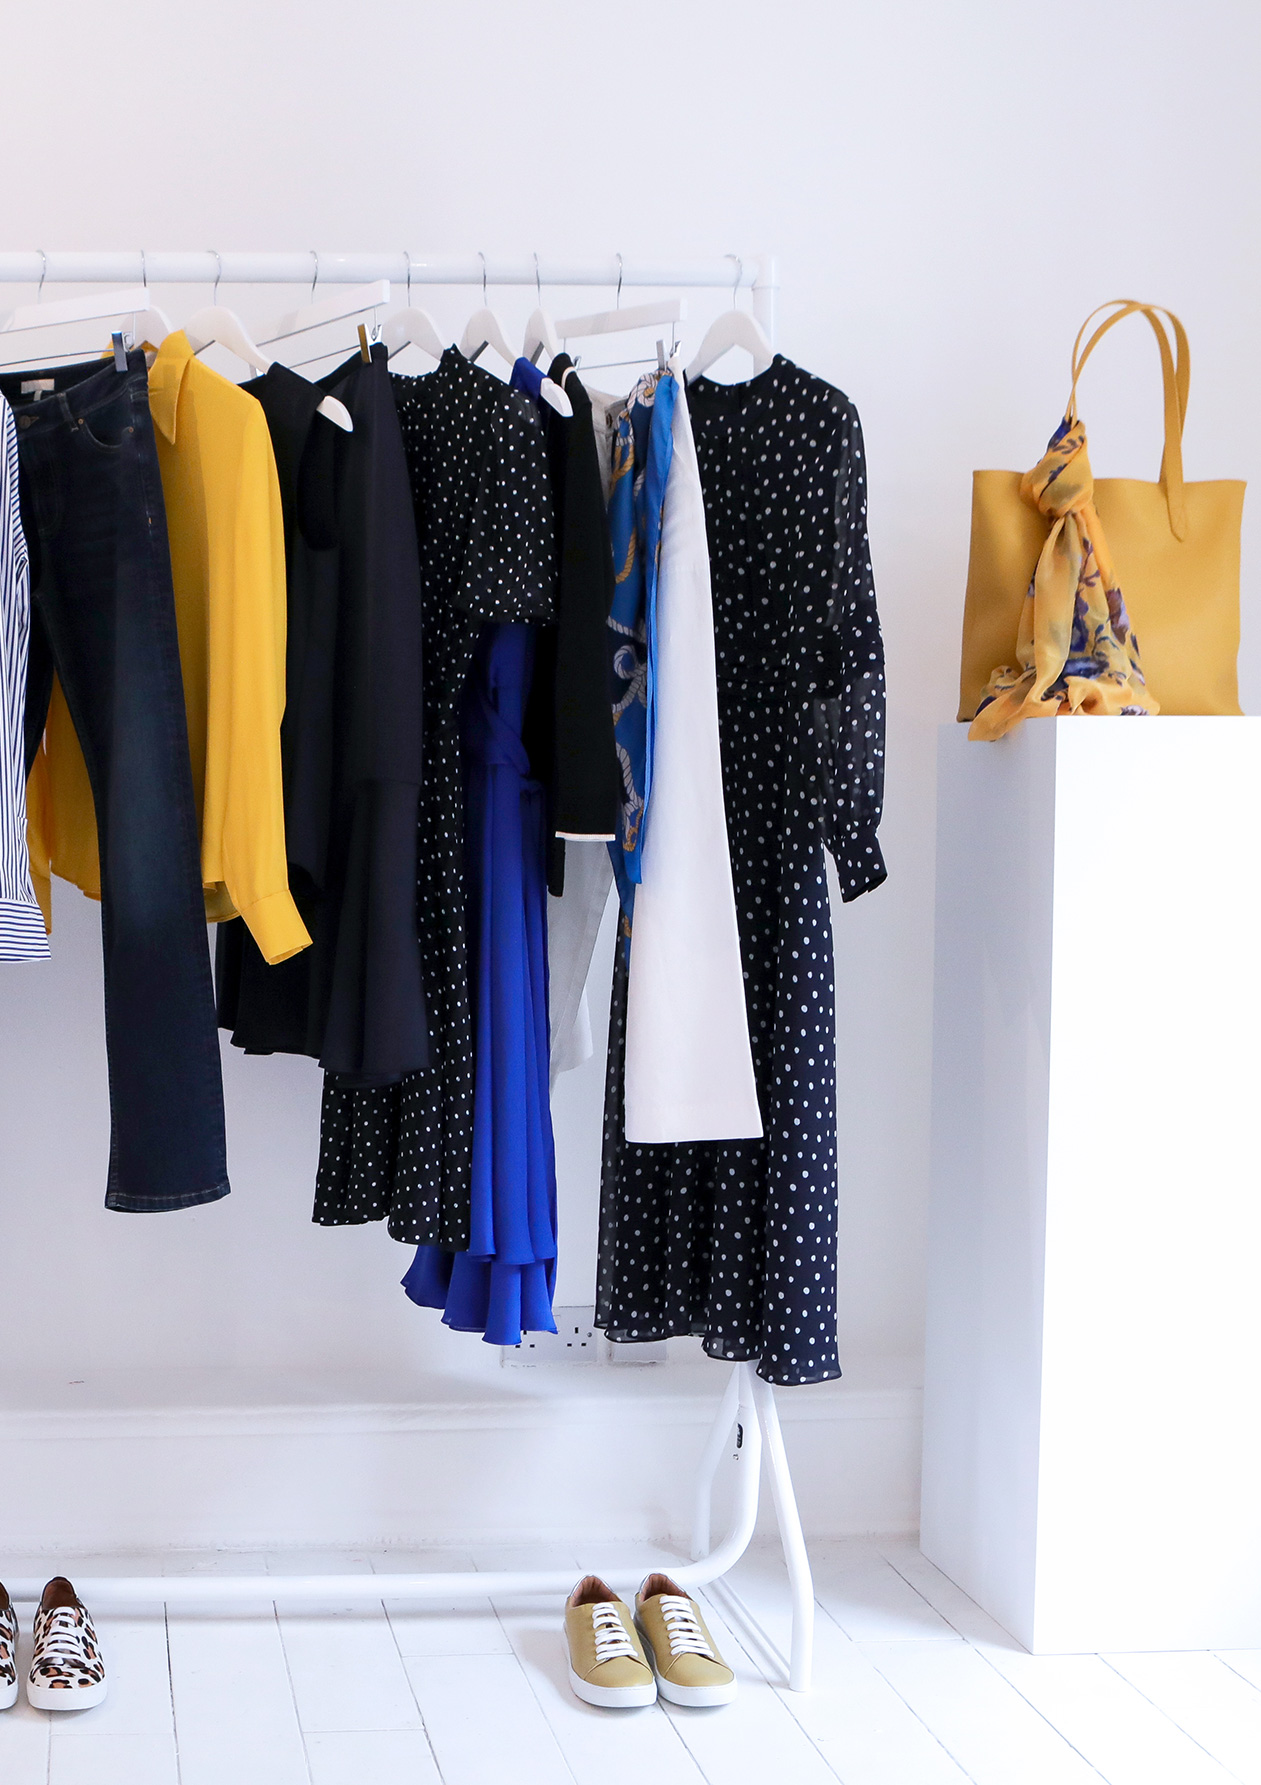 As the seasons change so does your wardrobe, a whiet clothes rail with a varity of navy blue, yellow and white clothes.